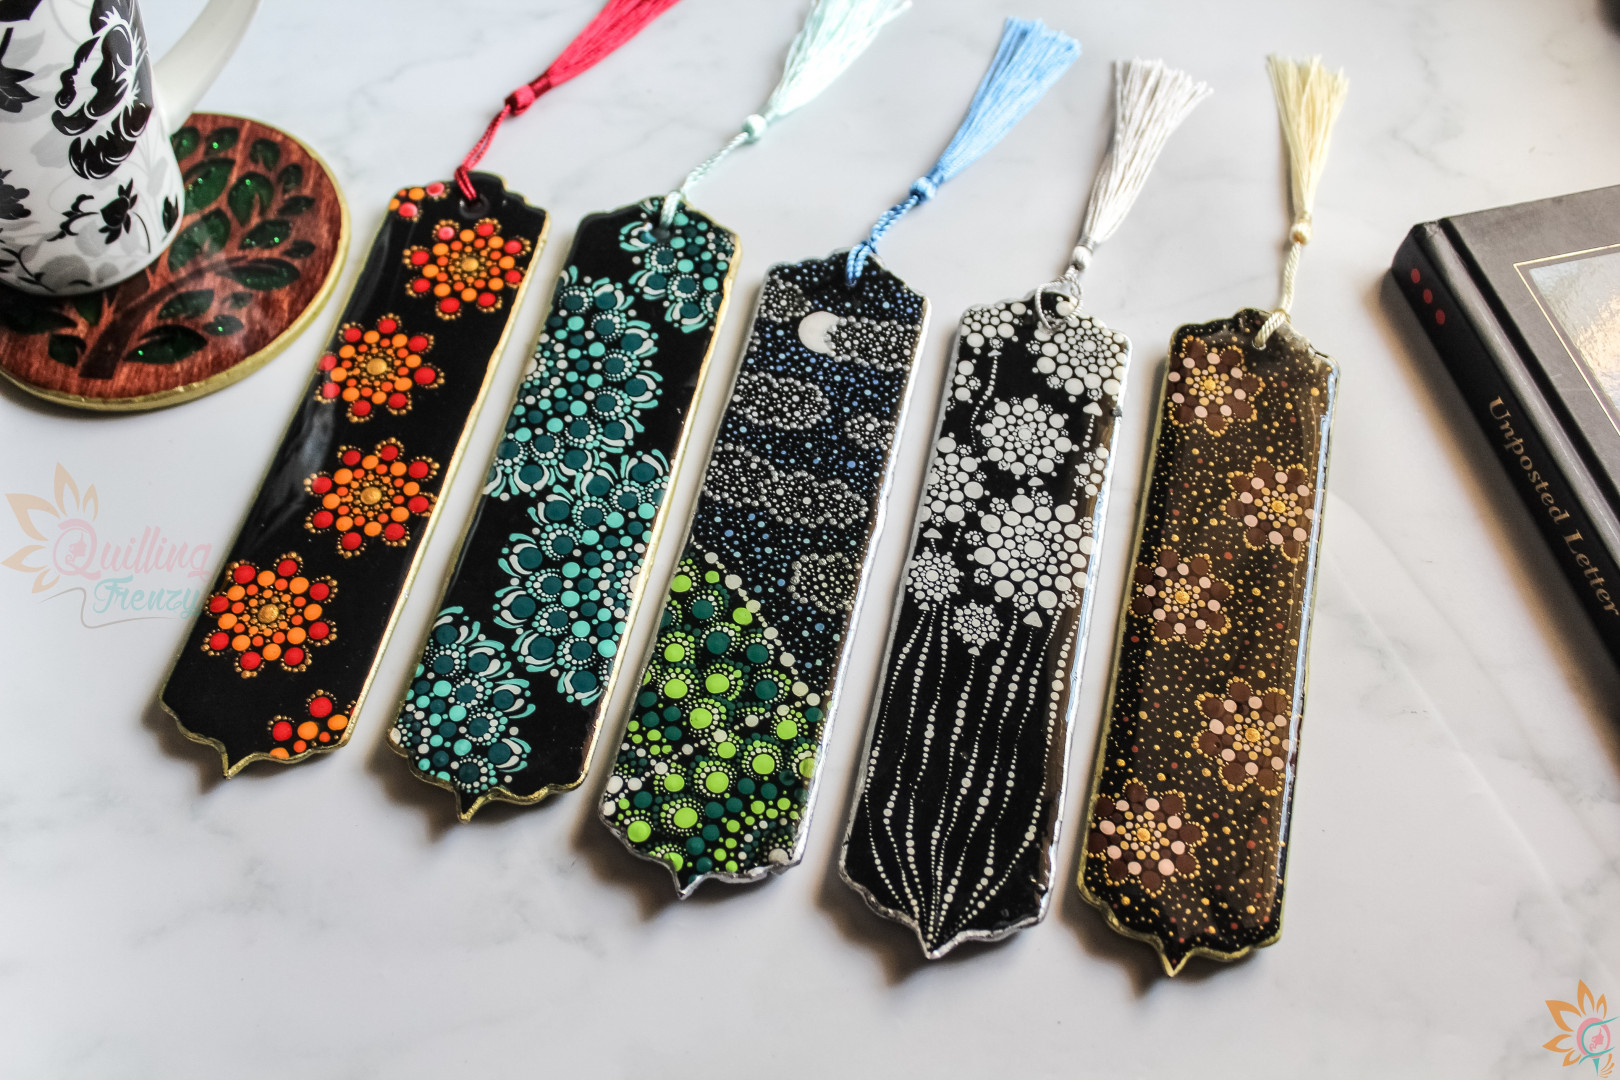 The Five Elements of Nature Book marks - Set of 5